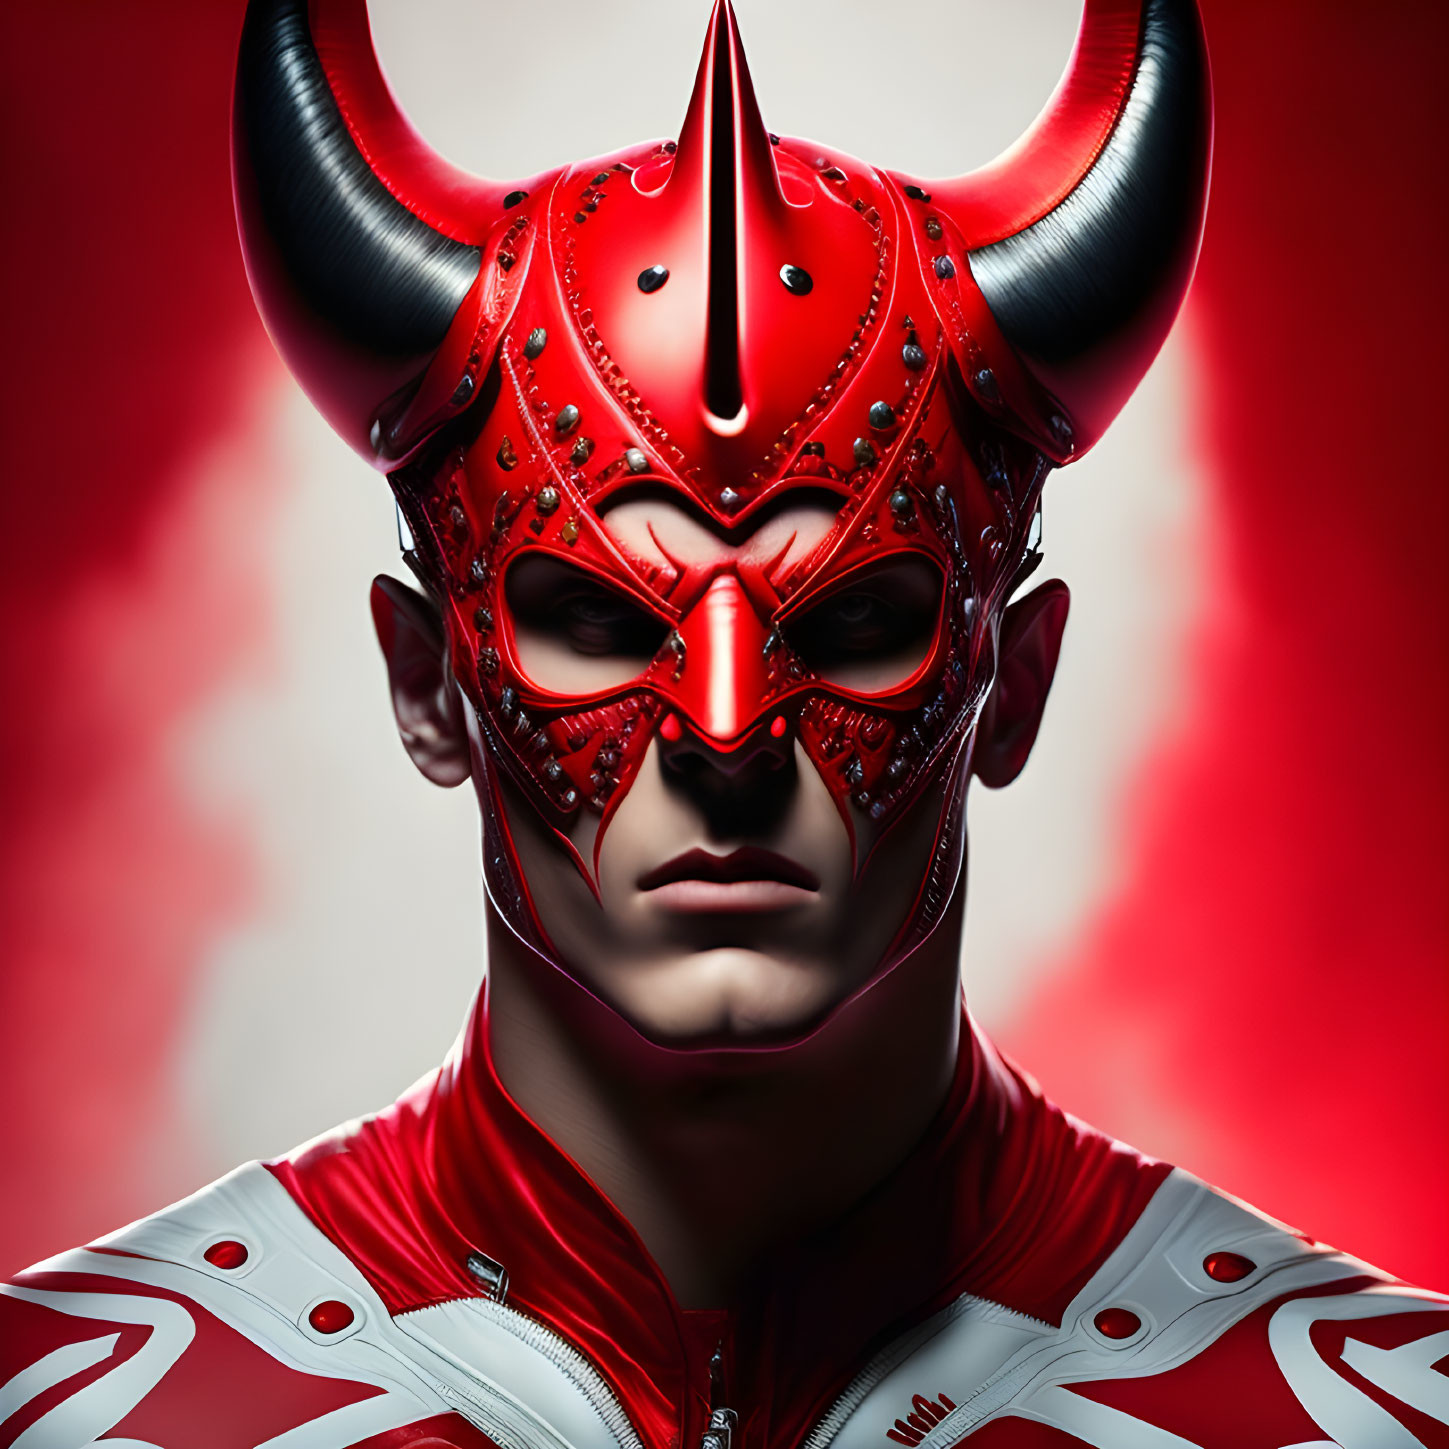 Red Devil Mask with Horns and Studded Details on Red Background